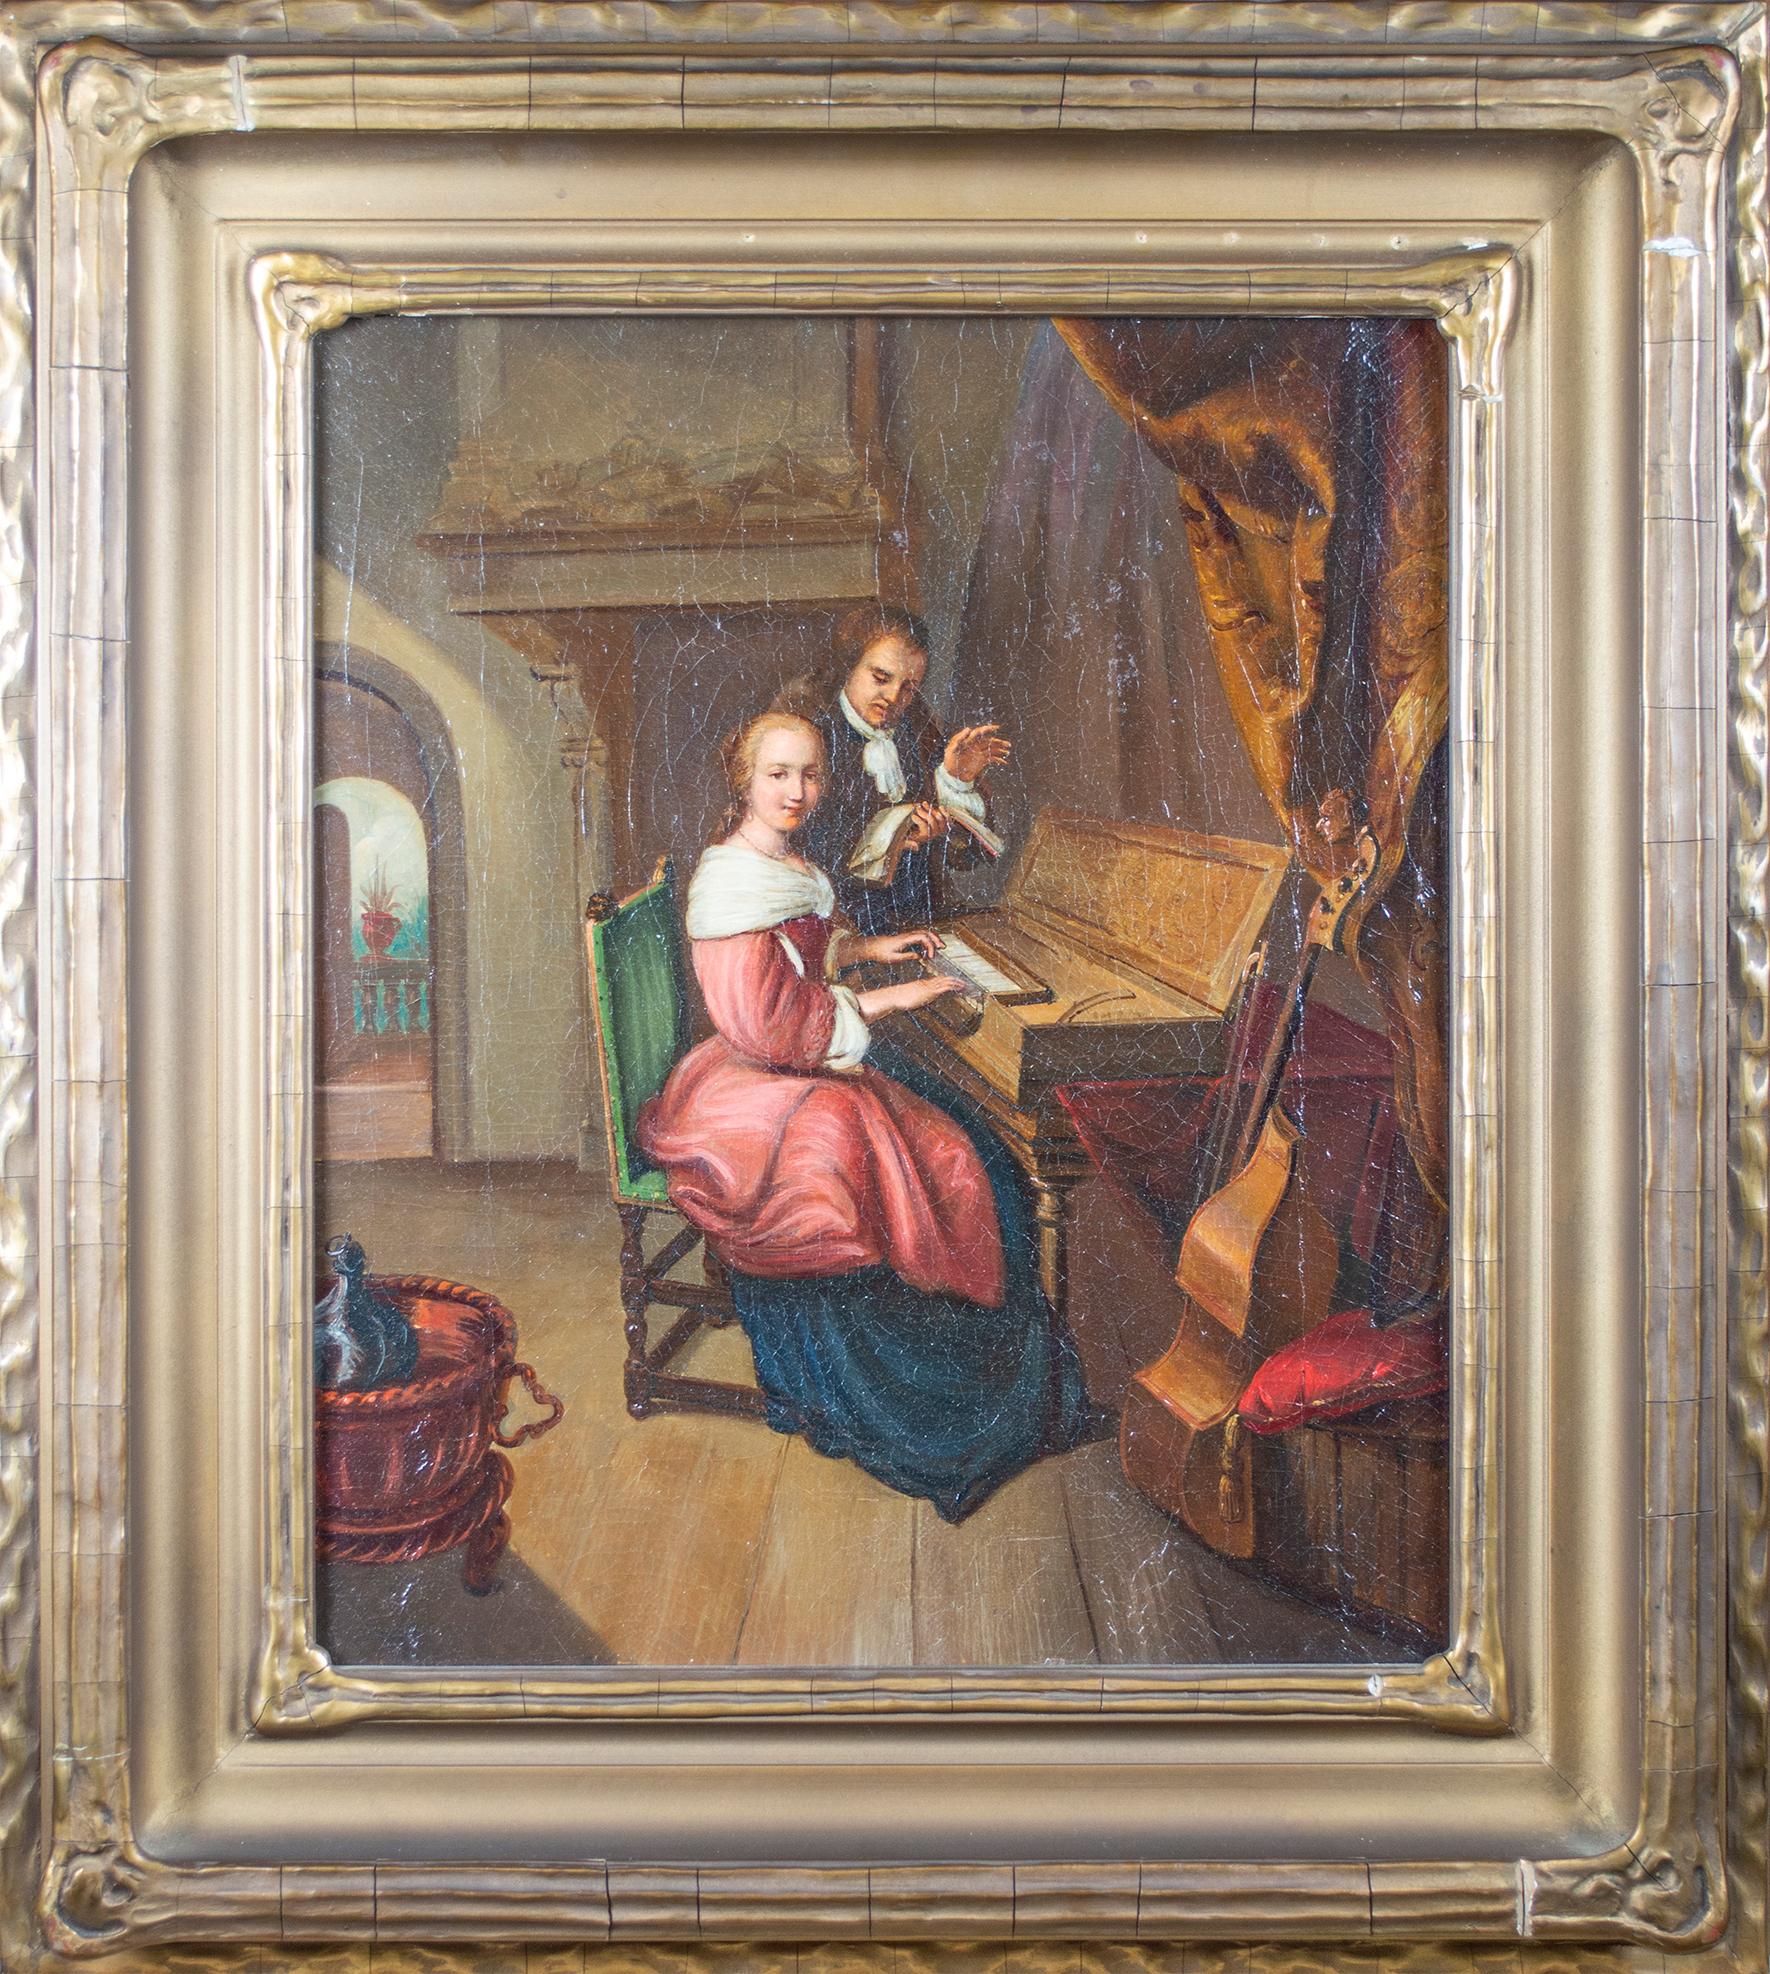 'The Music Lesson' original oil painting after Dou with clavichord and viol